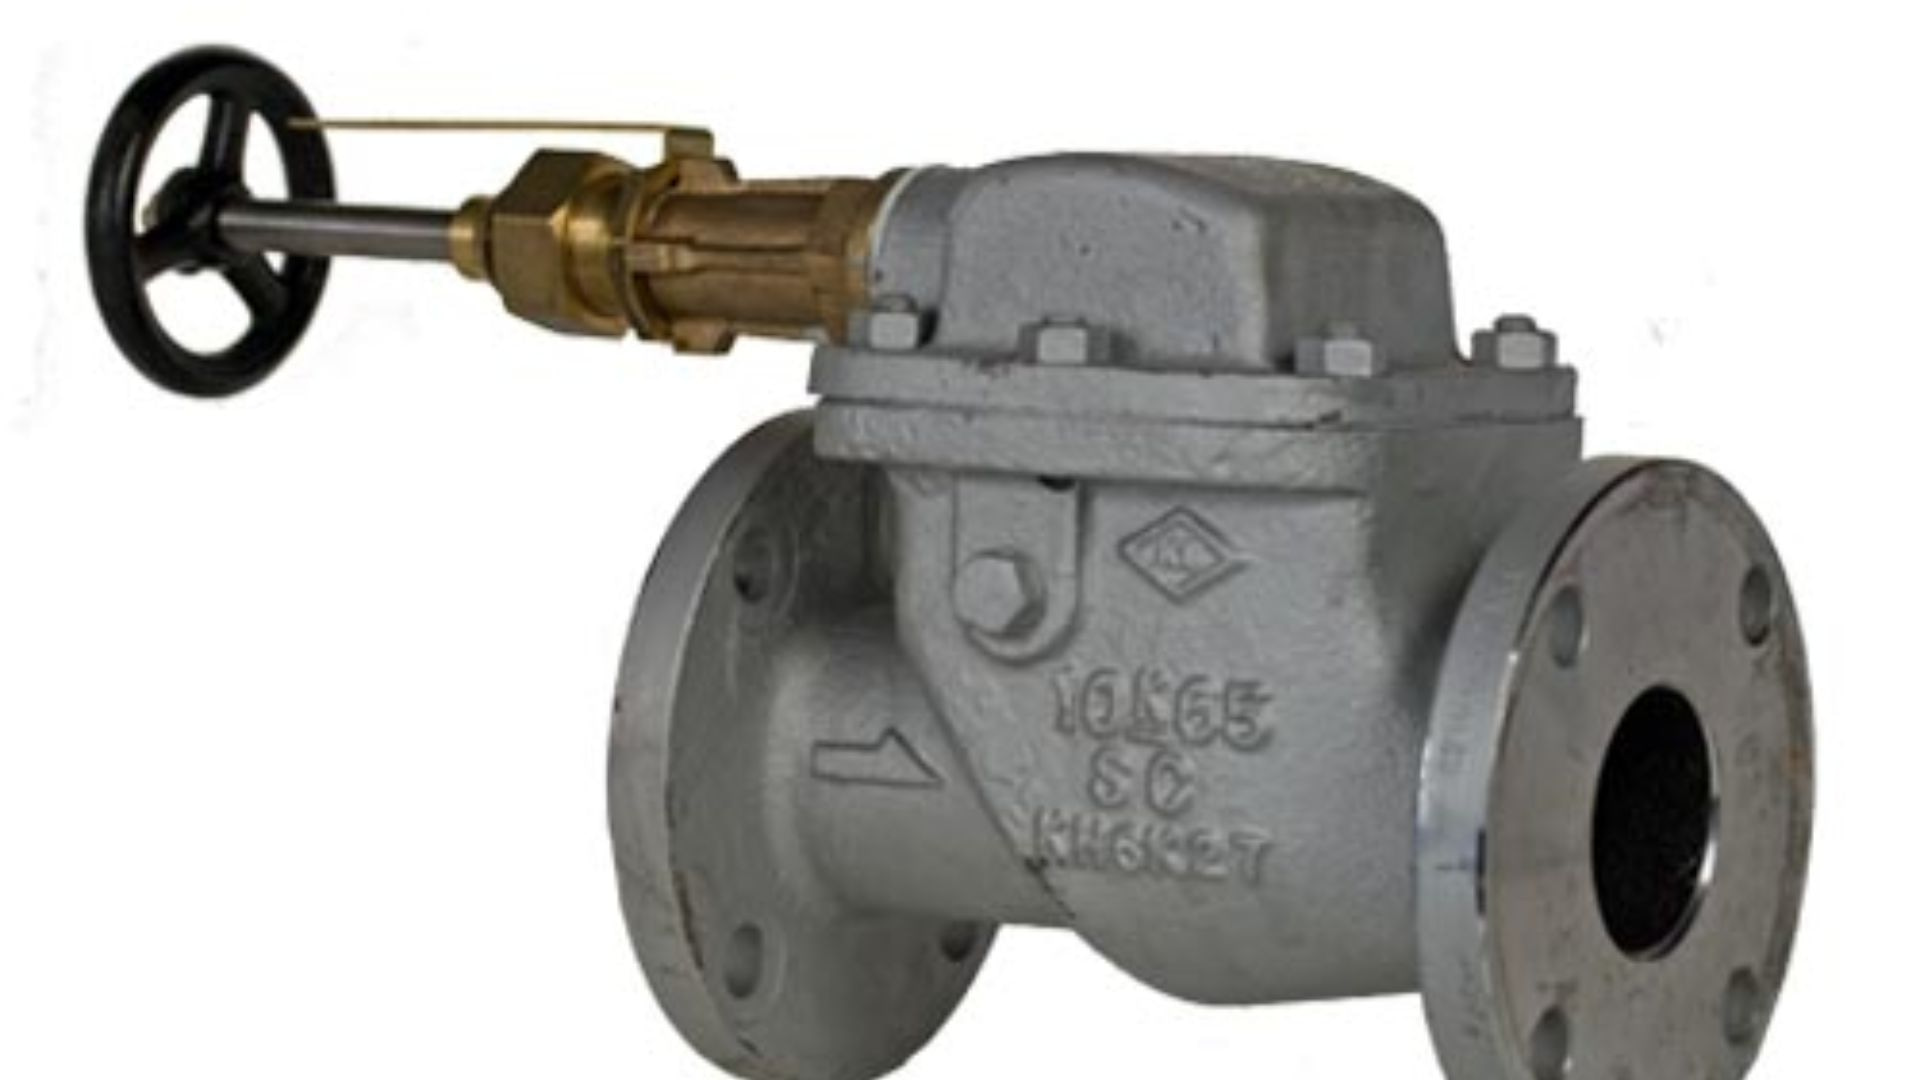 Benefit Most from 10K Marine Valves